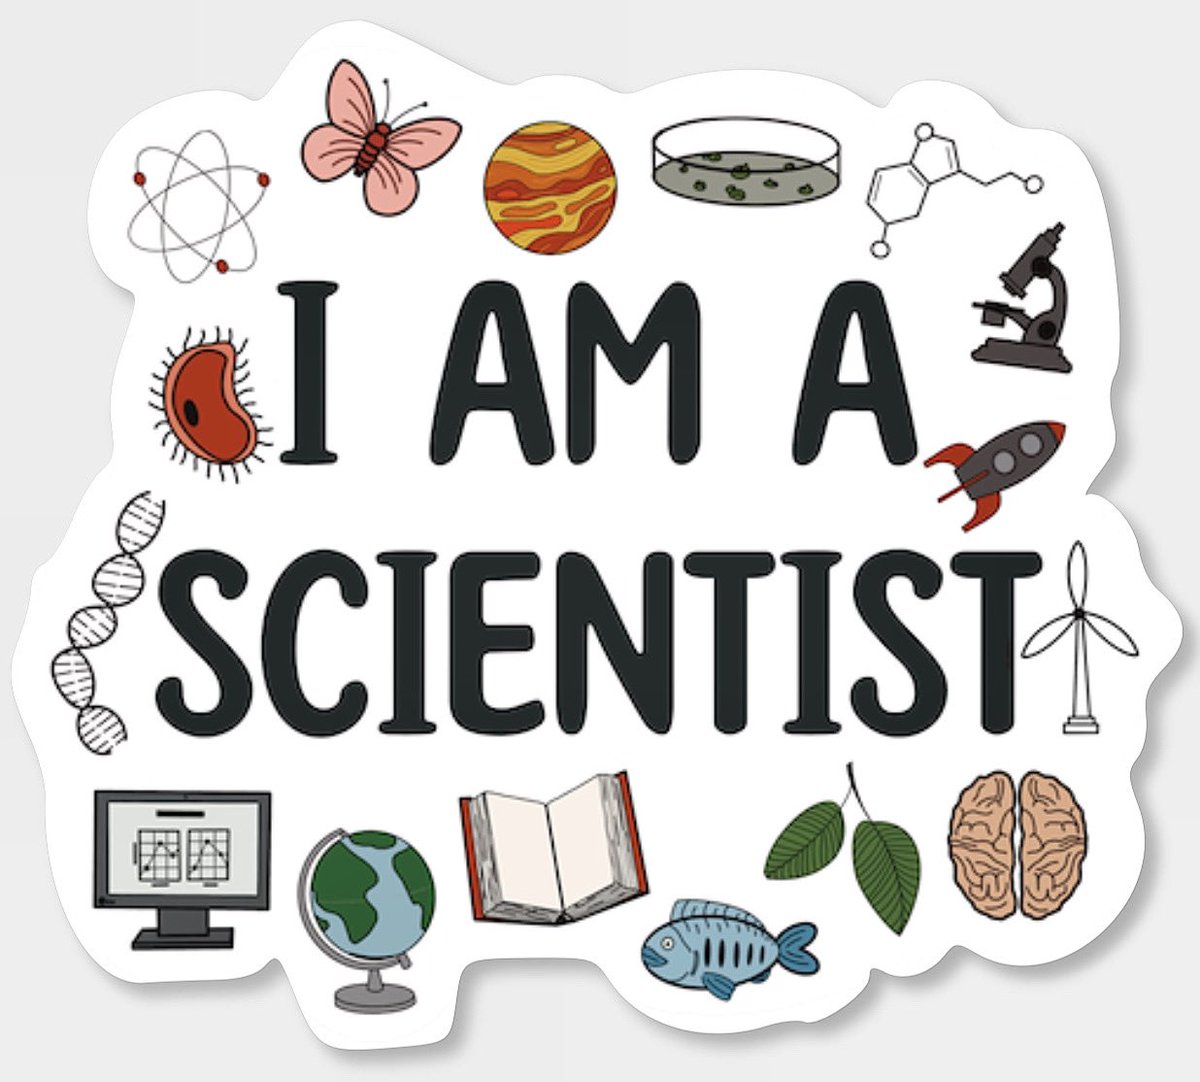 My new sticker might be my favorite so far because sometimes I need a reminder that I am a scientist!
#STEM #IAmAScientist #SciArt #ScienceAffirmation #digitalart 

designedwithhartman.etsy.com/listing/162438…